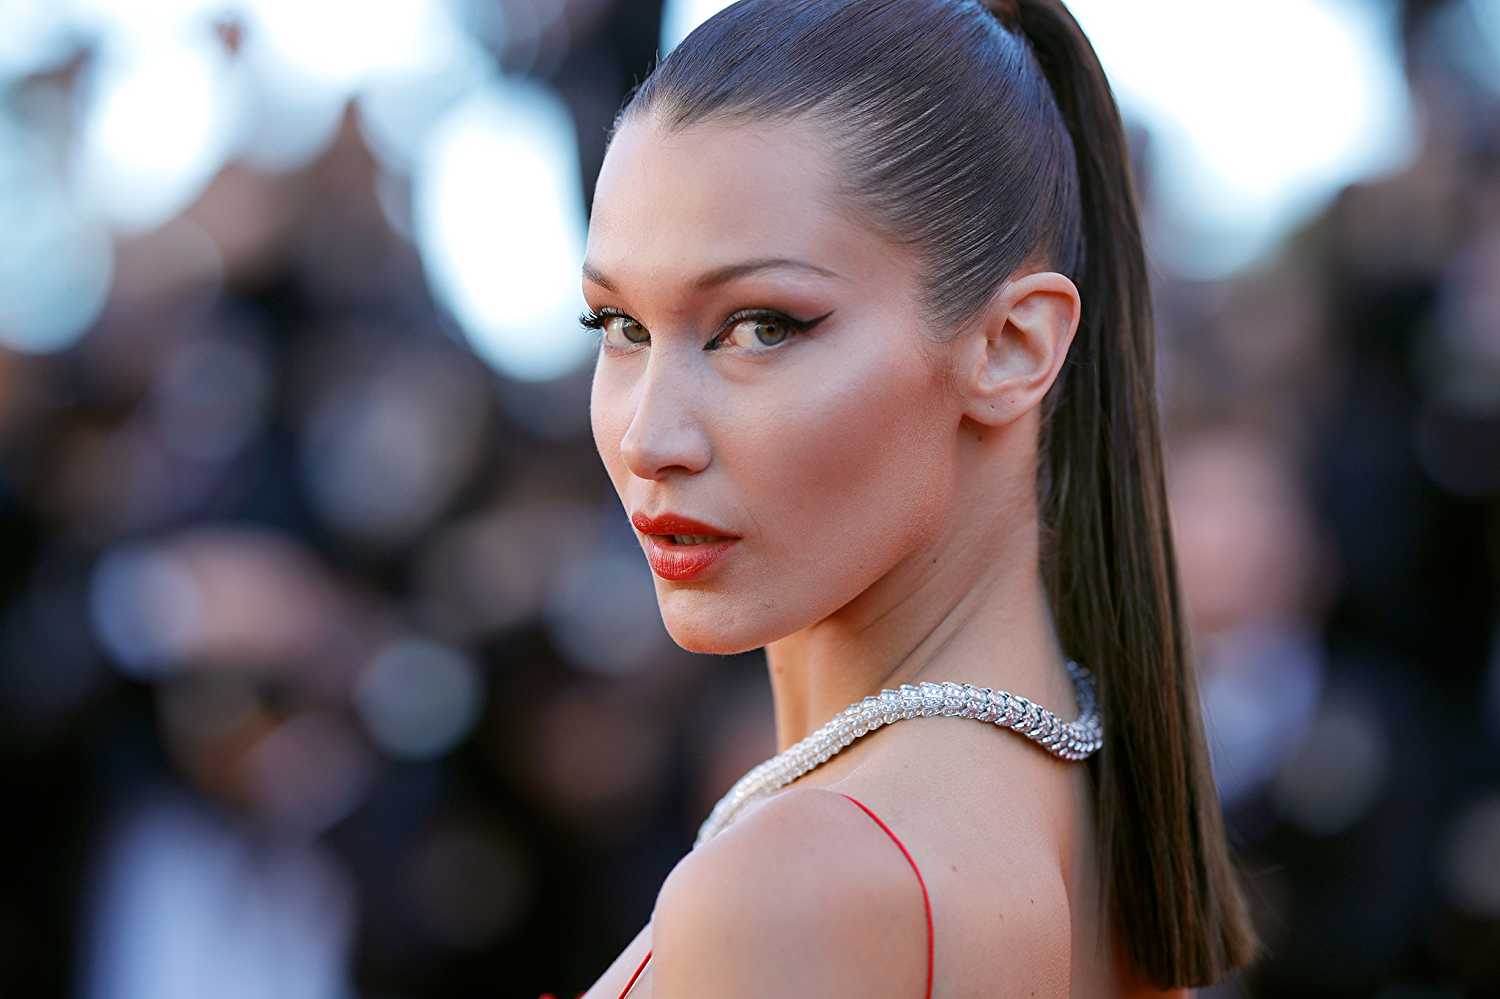 Bella Hadid wearing a red dress, a chain necklace and her hair tied in a high-ponytail